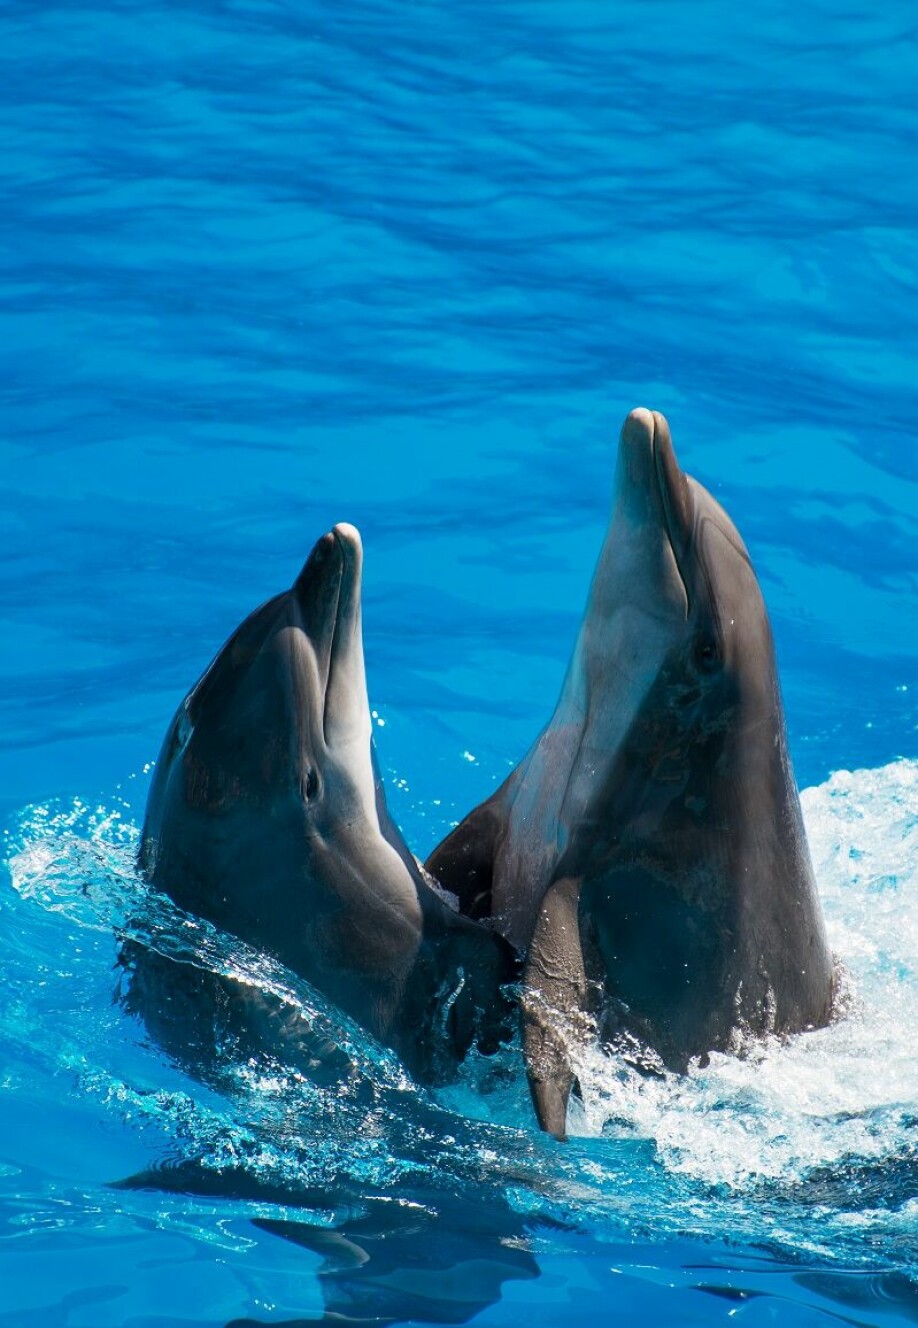 Bottlenose dolphins are possibly the most well known dolphin species.